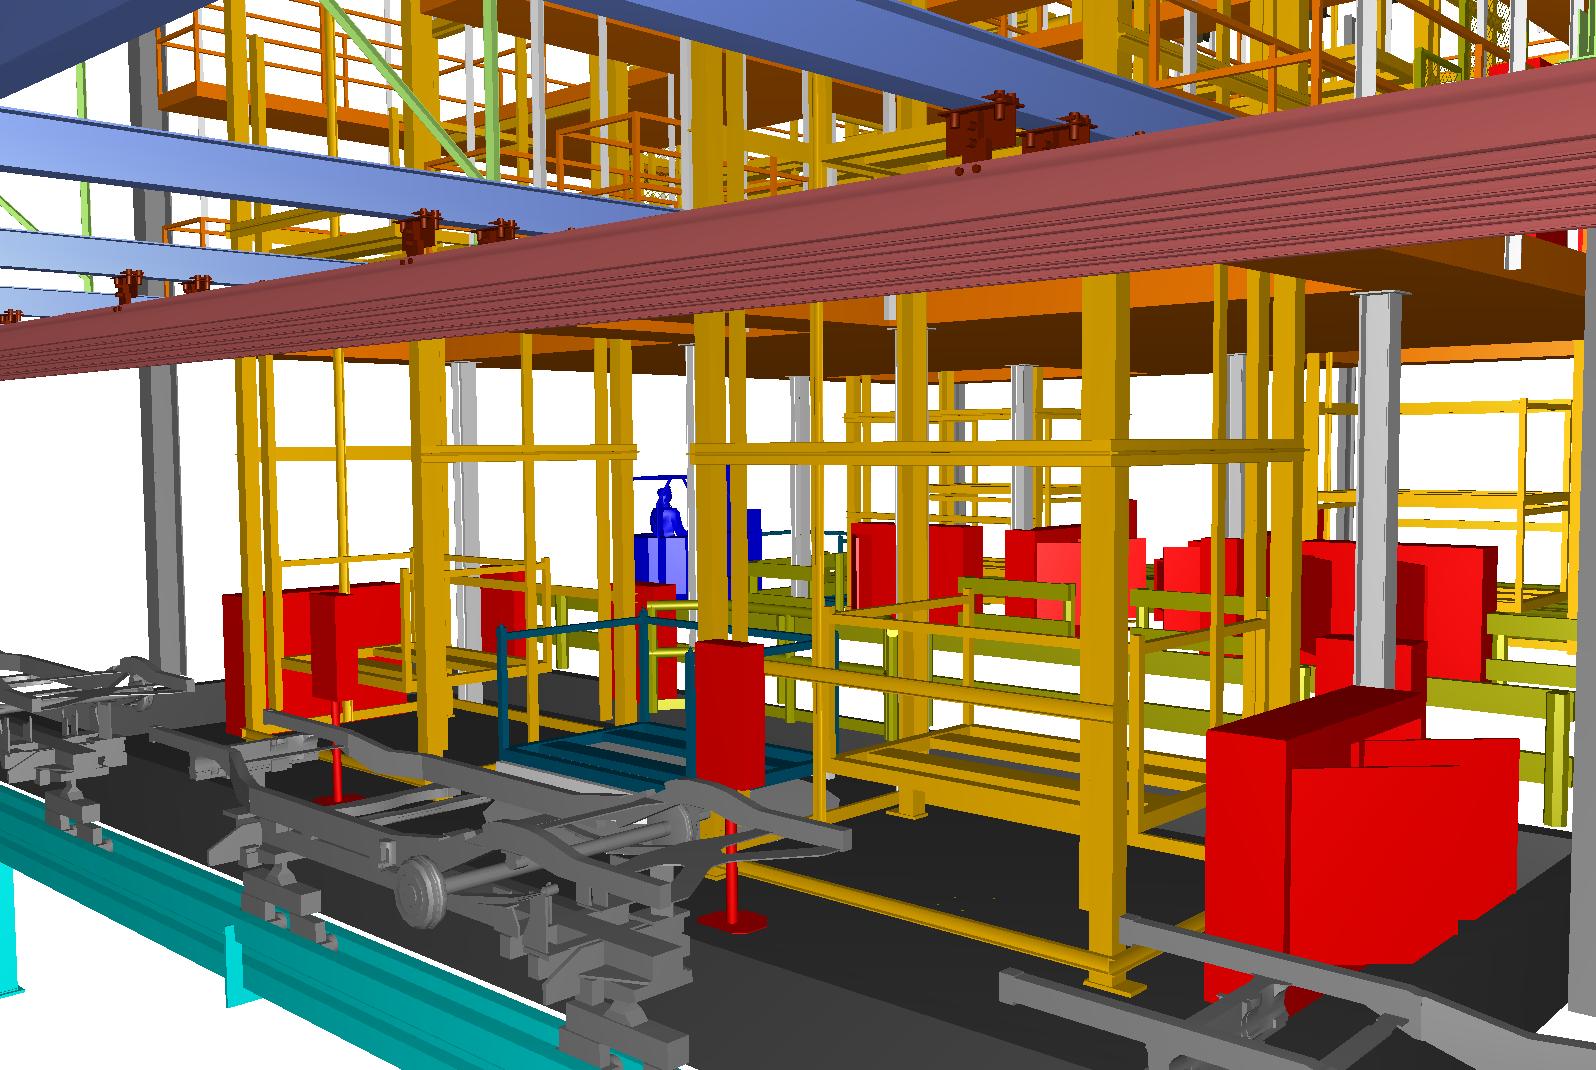 Laser Scanning in Manufacturing and Industrial Plants